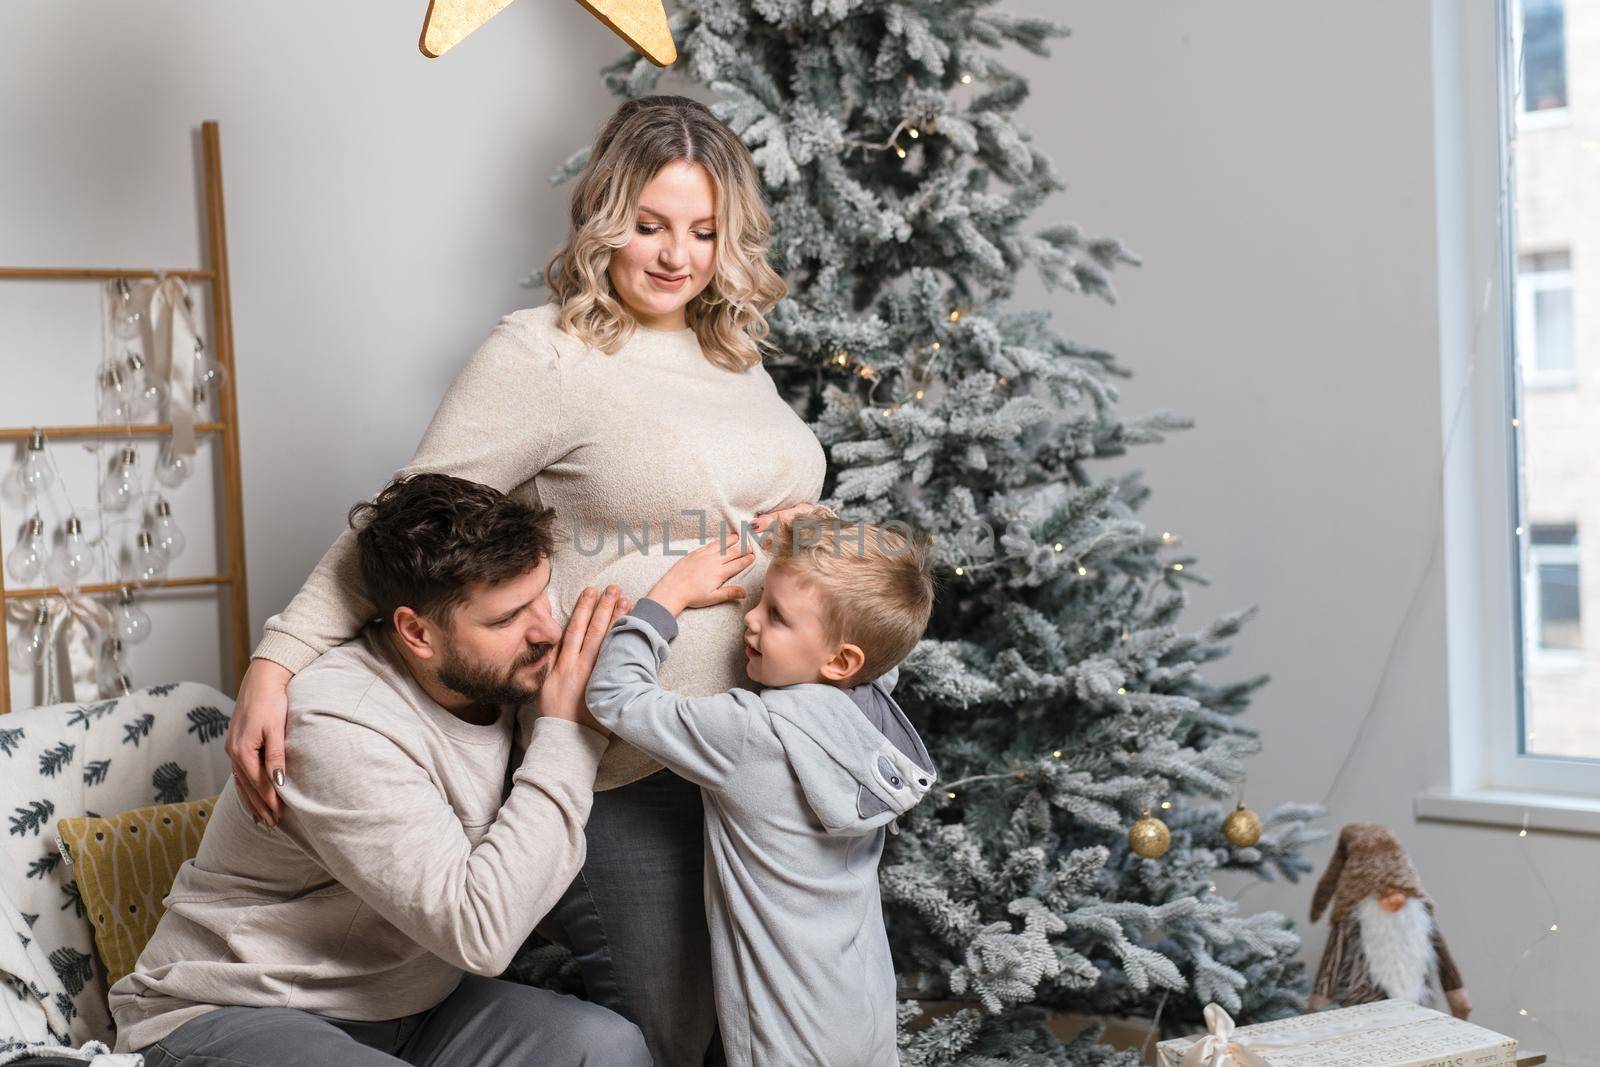 Christmas Family Happiness Portrait of dad, pregnant mom and little son sitting armchair at home near Christmas tree hug smile European young adult family holiday morning